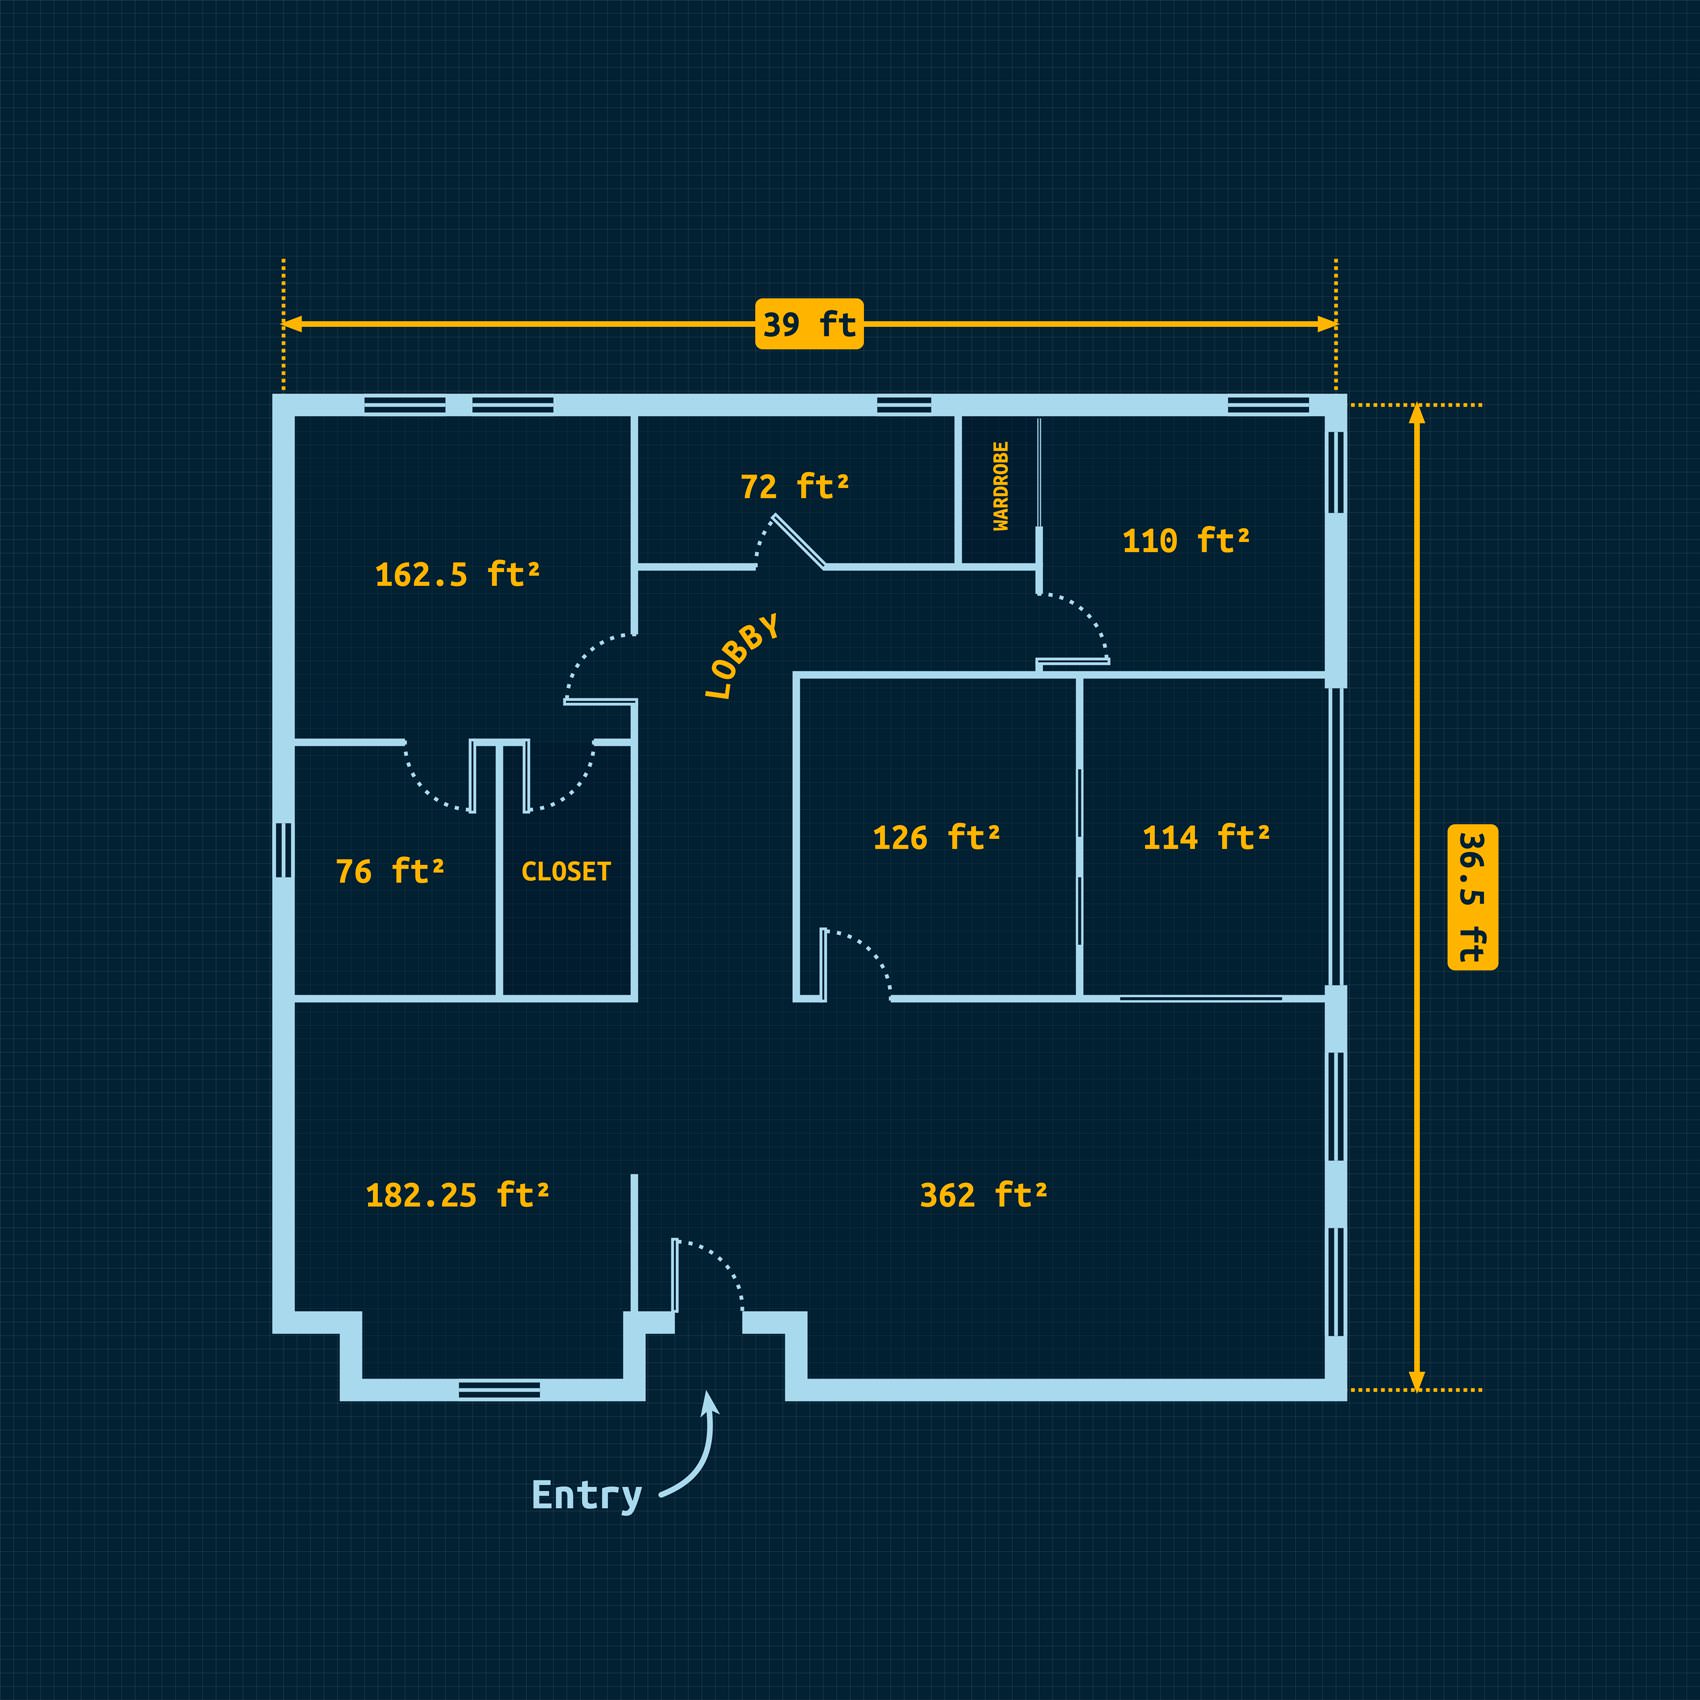 Simple Floor Plan With Dimensions - Please activate subscription plan